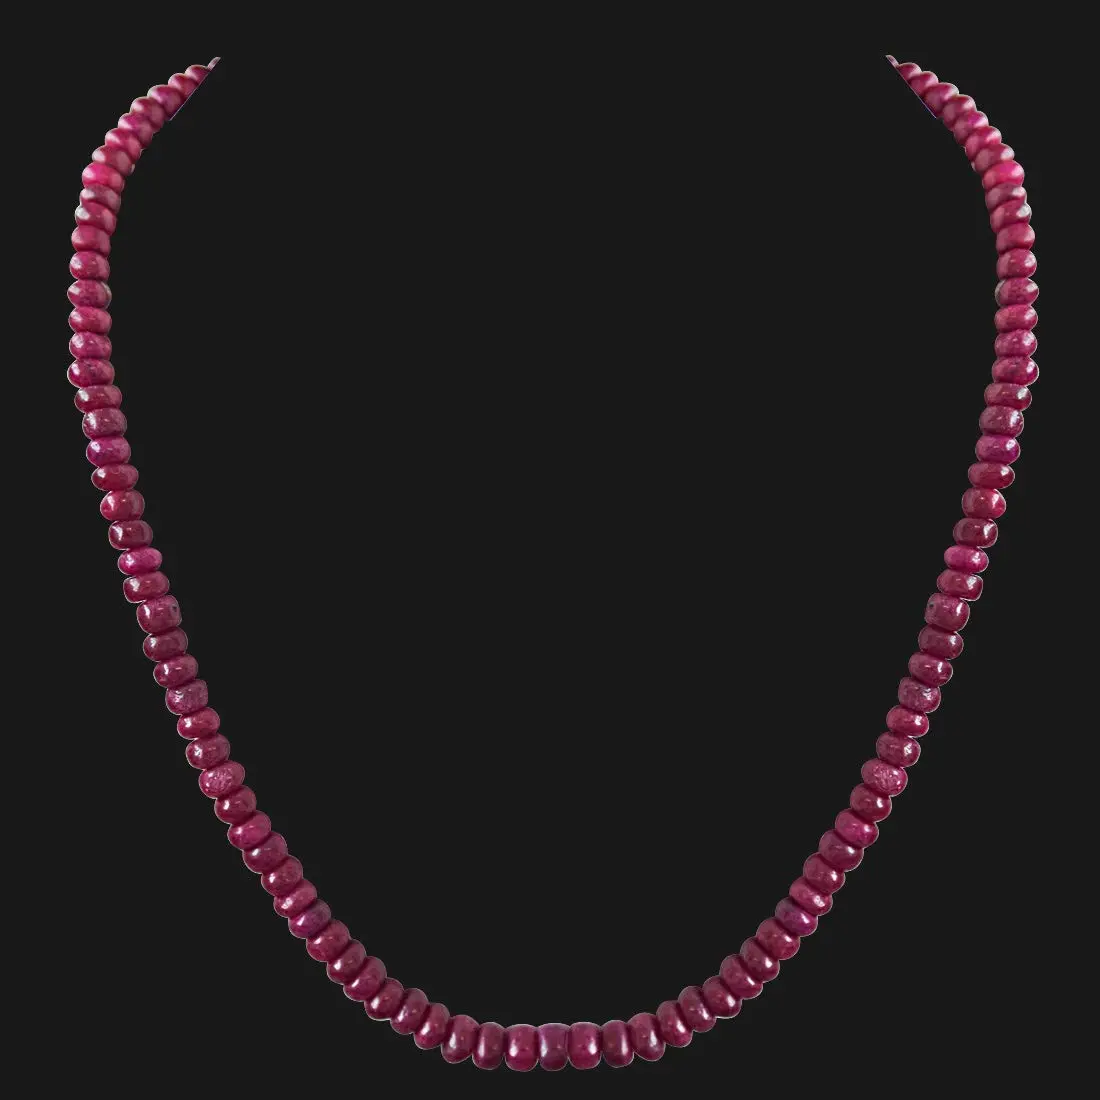 252cts Single Line Real Maroon Red Ruby Beads Necklace for Women (252ctsRubyNeck)